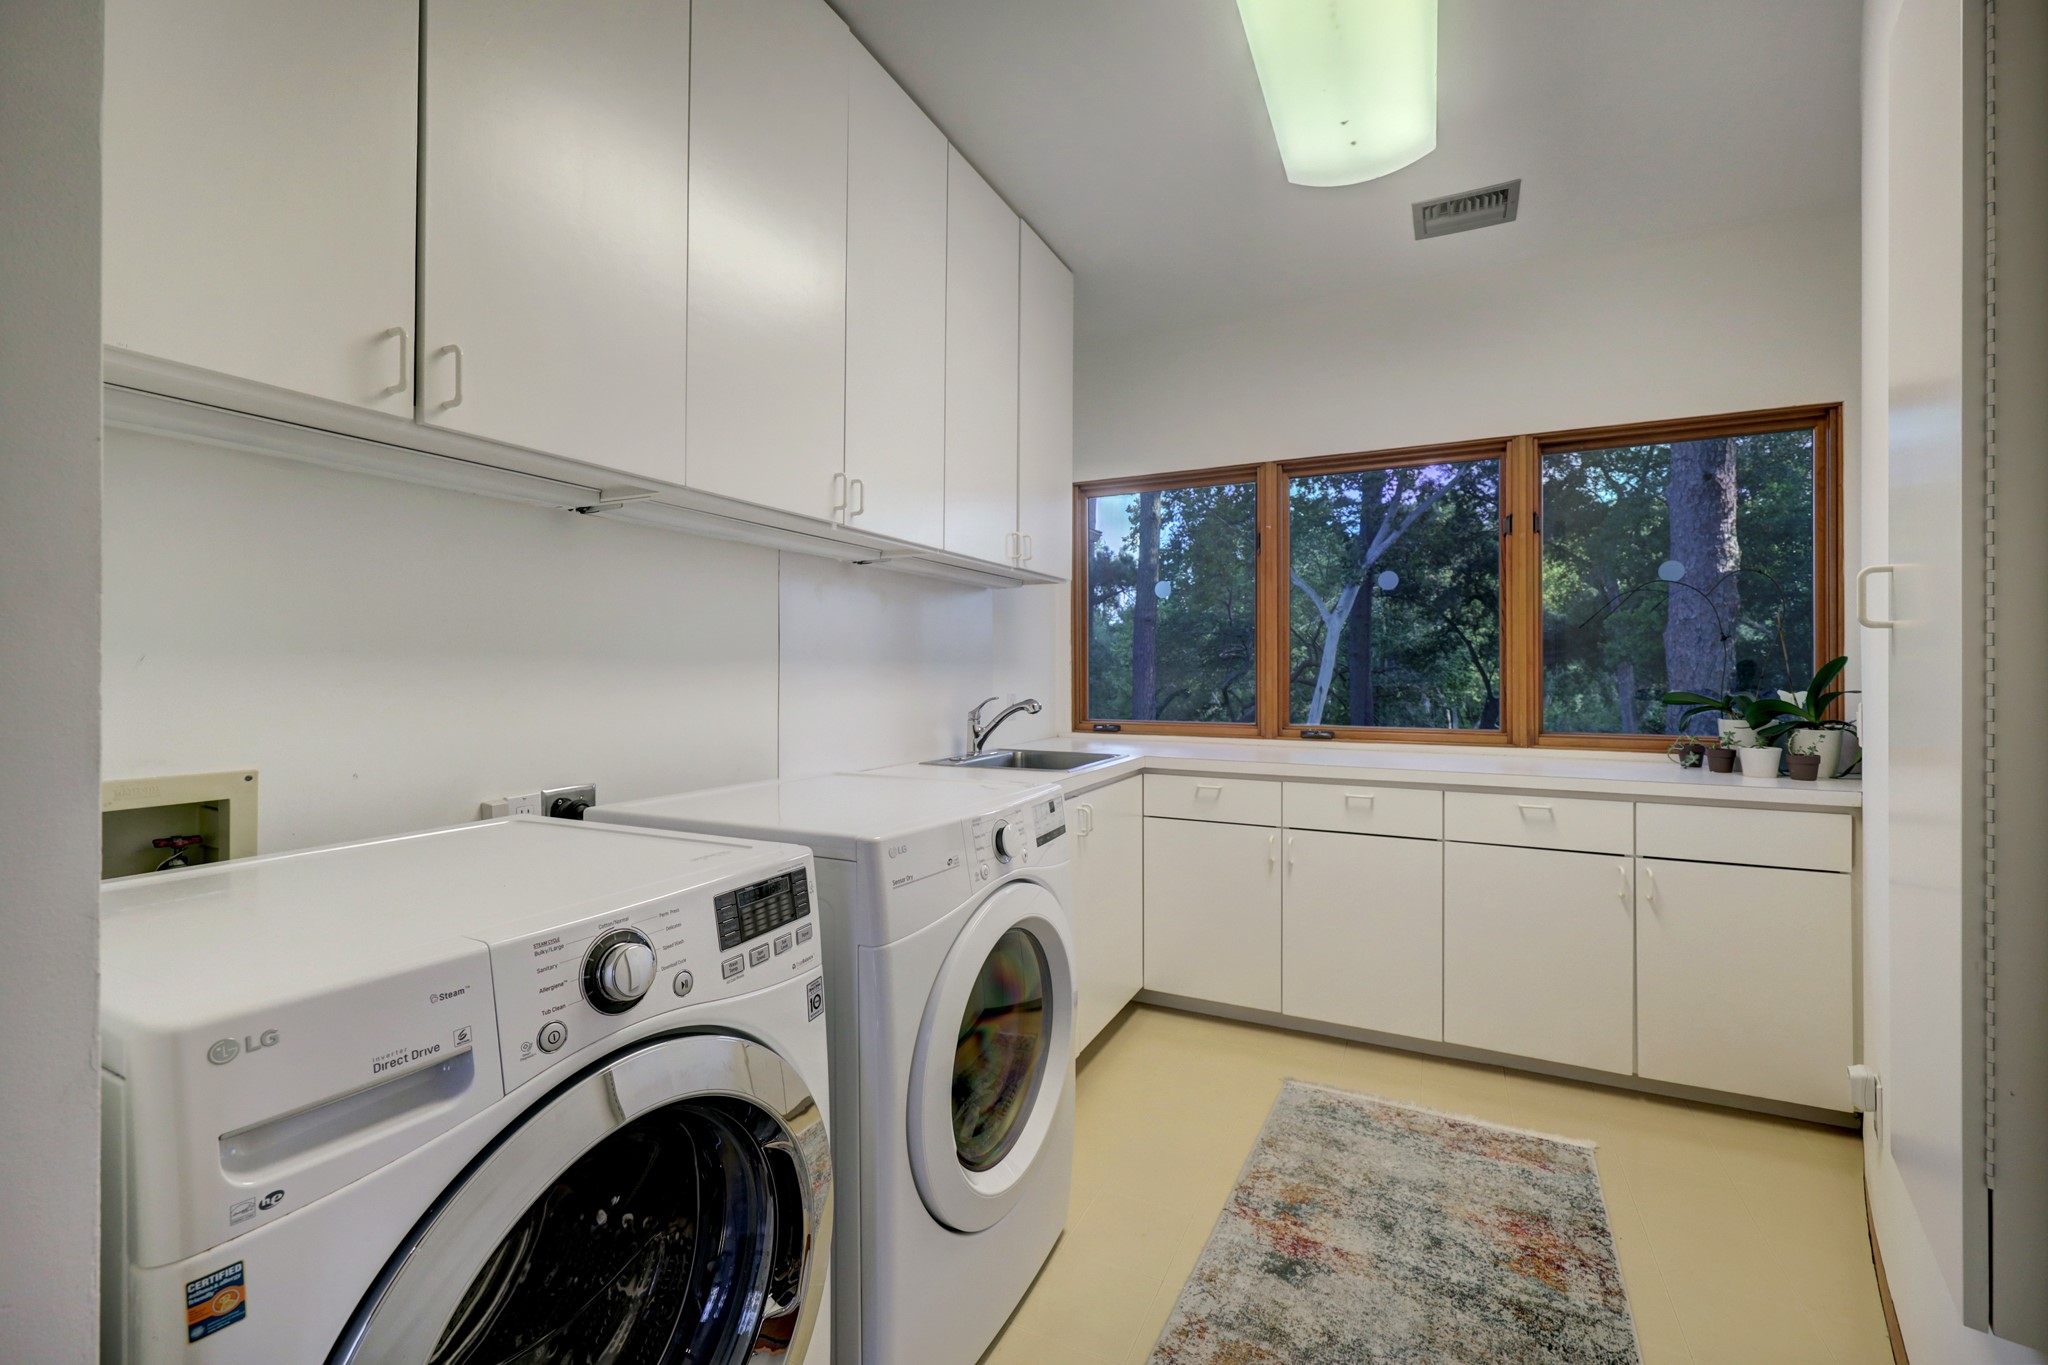 Spacious Laundry area with plenty of cabinets for storage and great views.